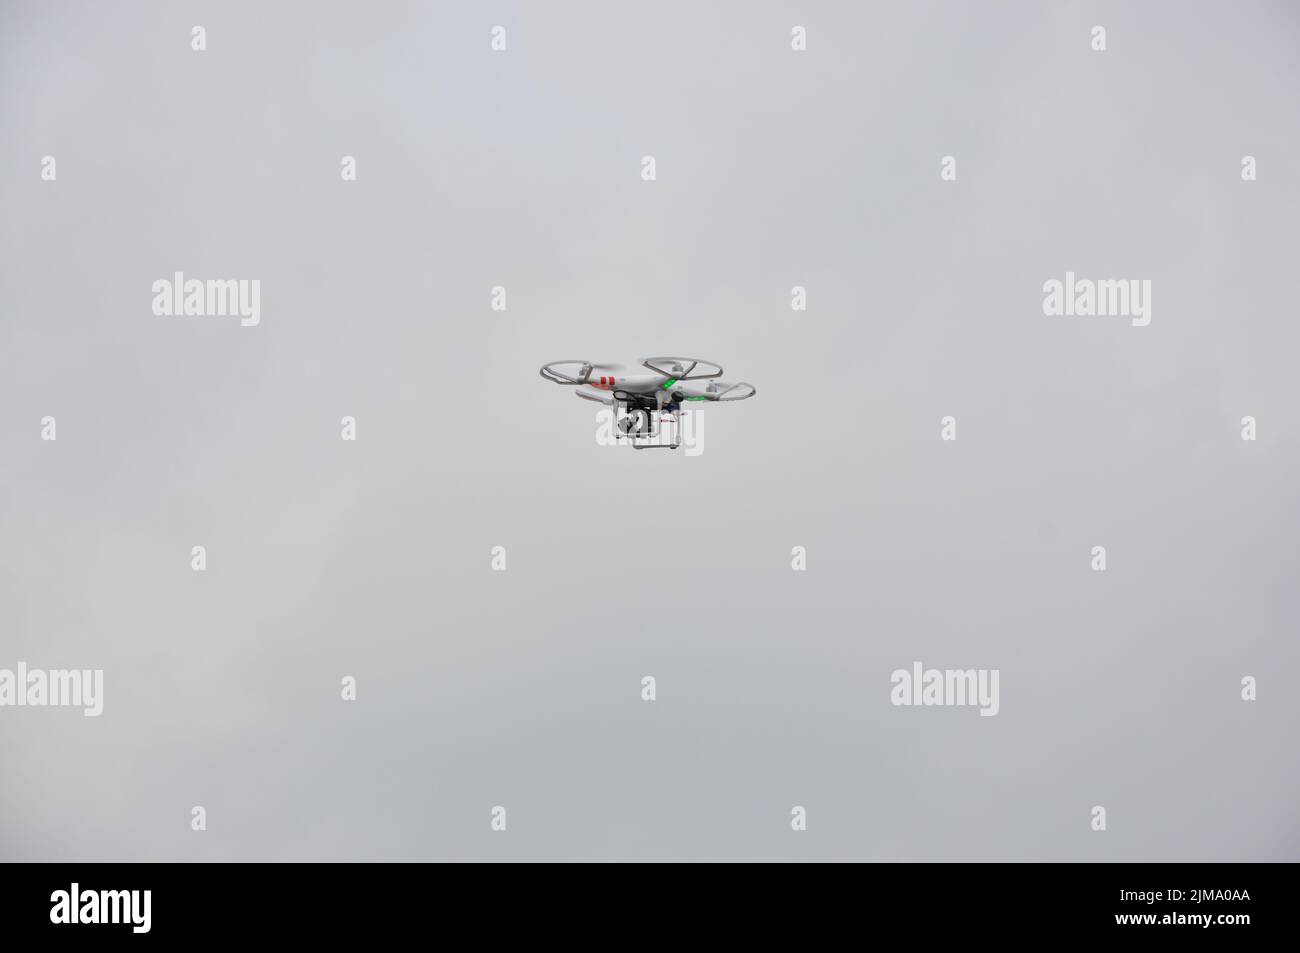 The DJI Phantom drone in the air with red and green position lights Stock Photo